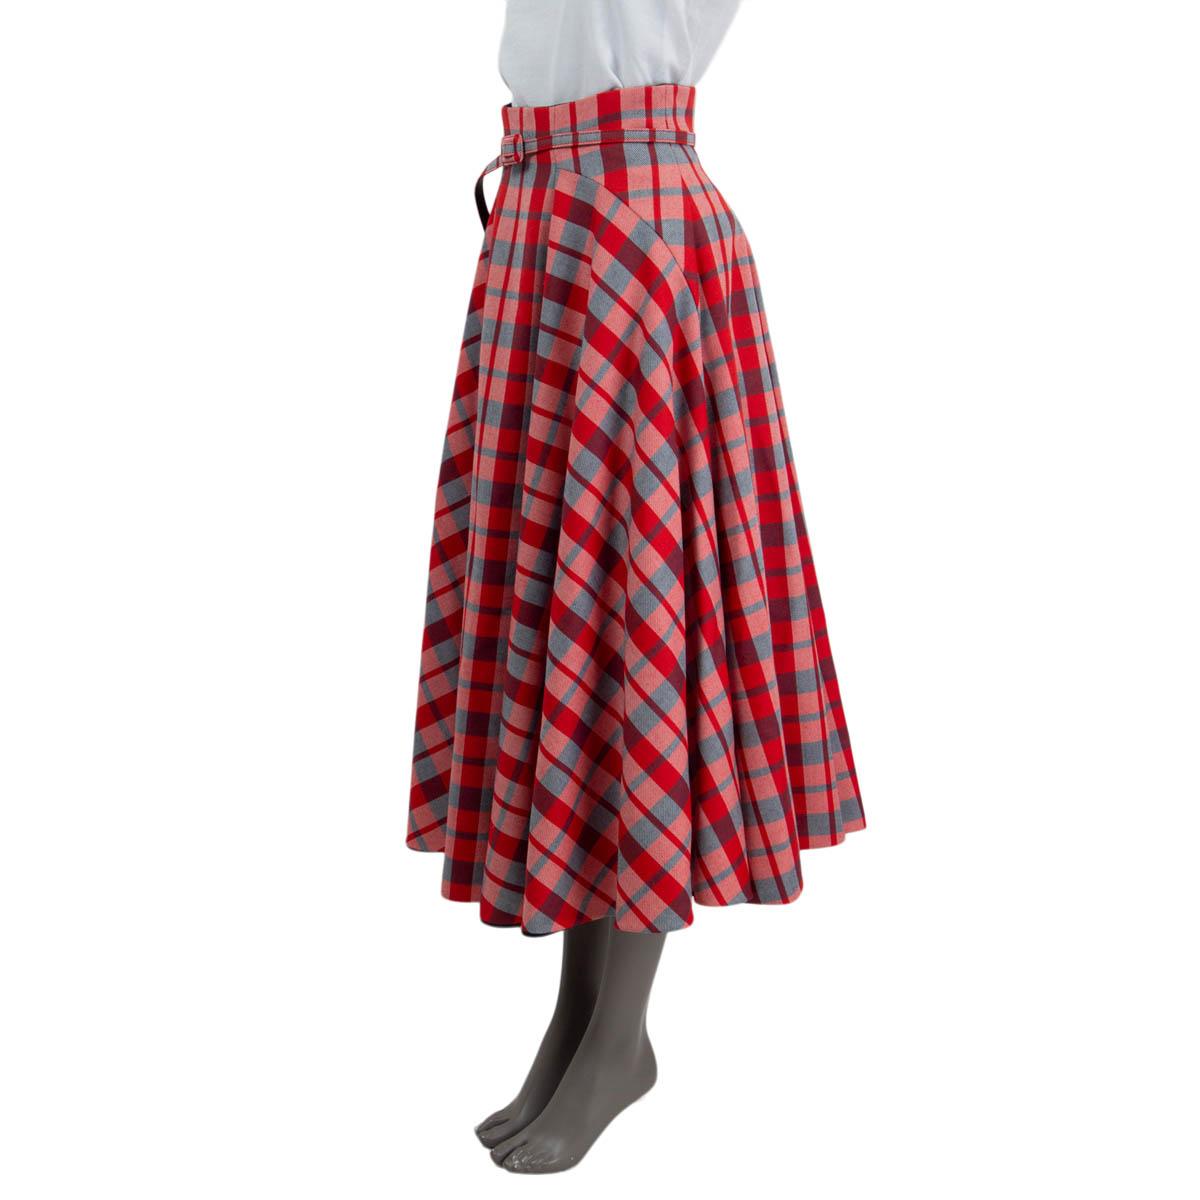 100% authentic Christian Dior Fall/Winter 2021 Check'n'Dior tartan midi skirt in red, navy and off-white virgin wool (100%). Features a detachable matching belt. Opens with a concealed zipper and a hook on the back. Lined in navy silk (100%). Has